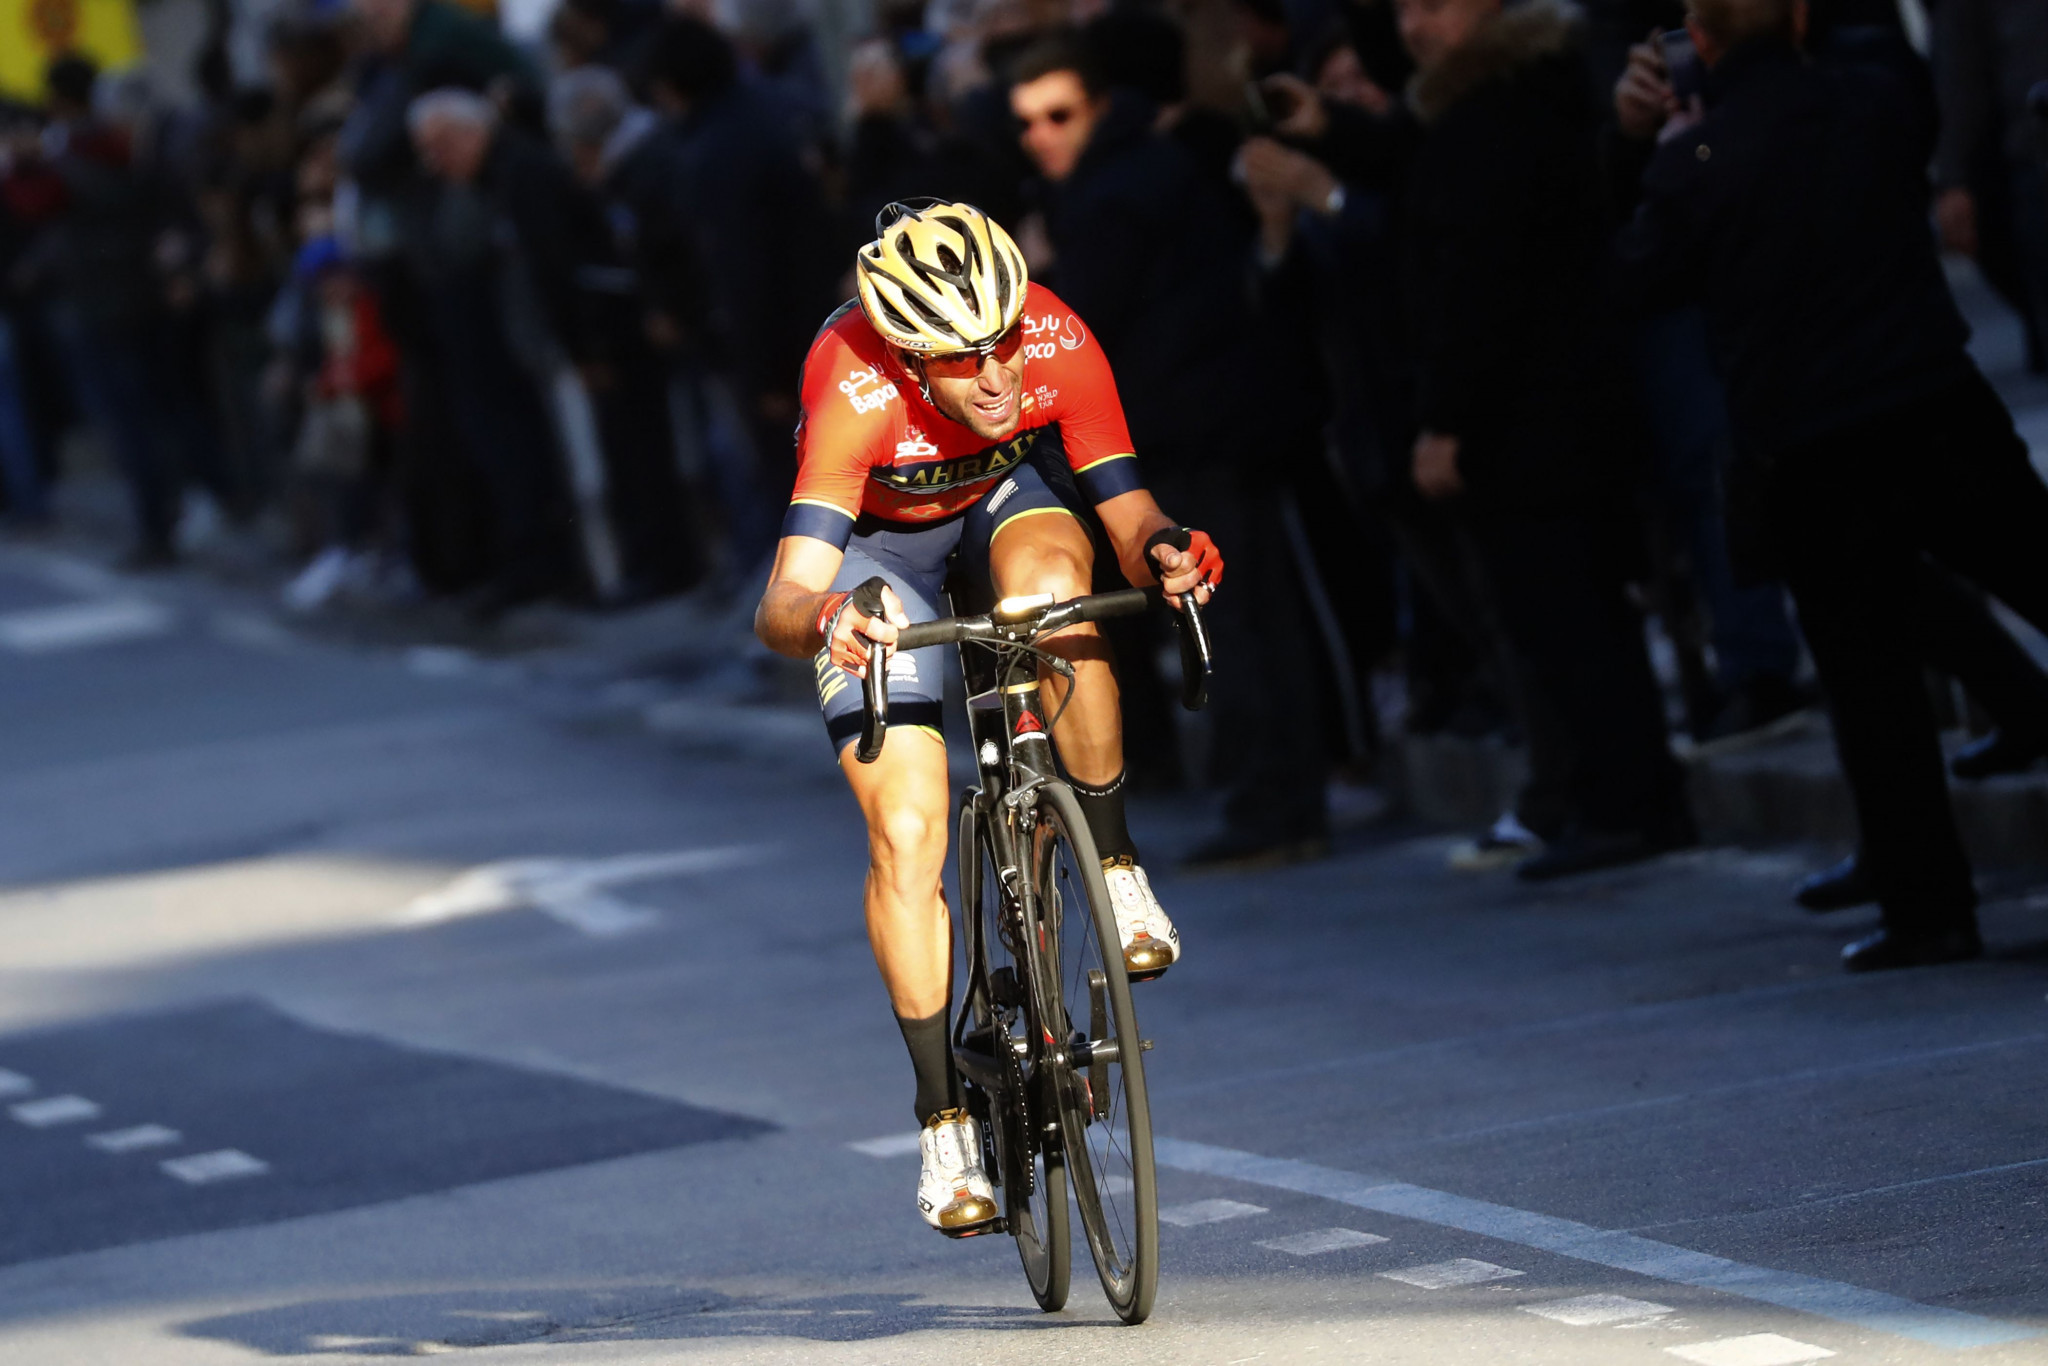 Vincenzo Nibali won the Milan-San Remo race earlier this year ©Getty Images